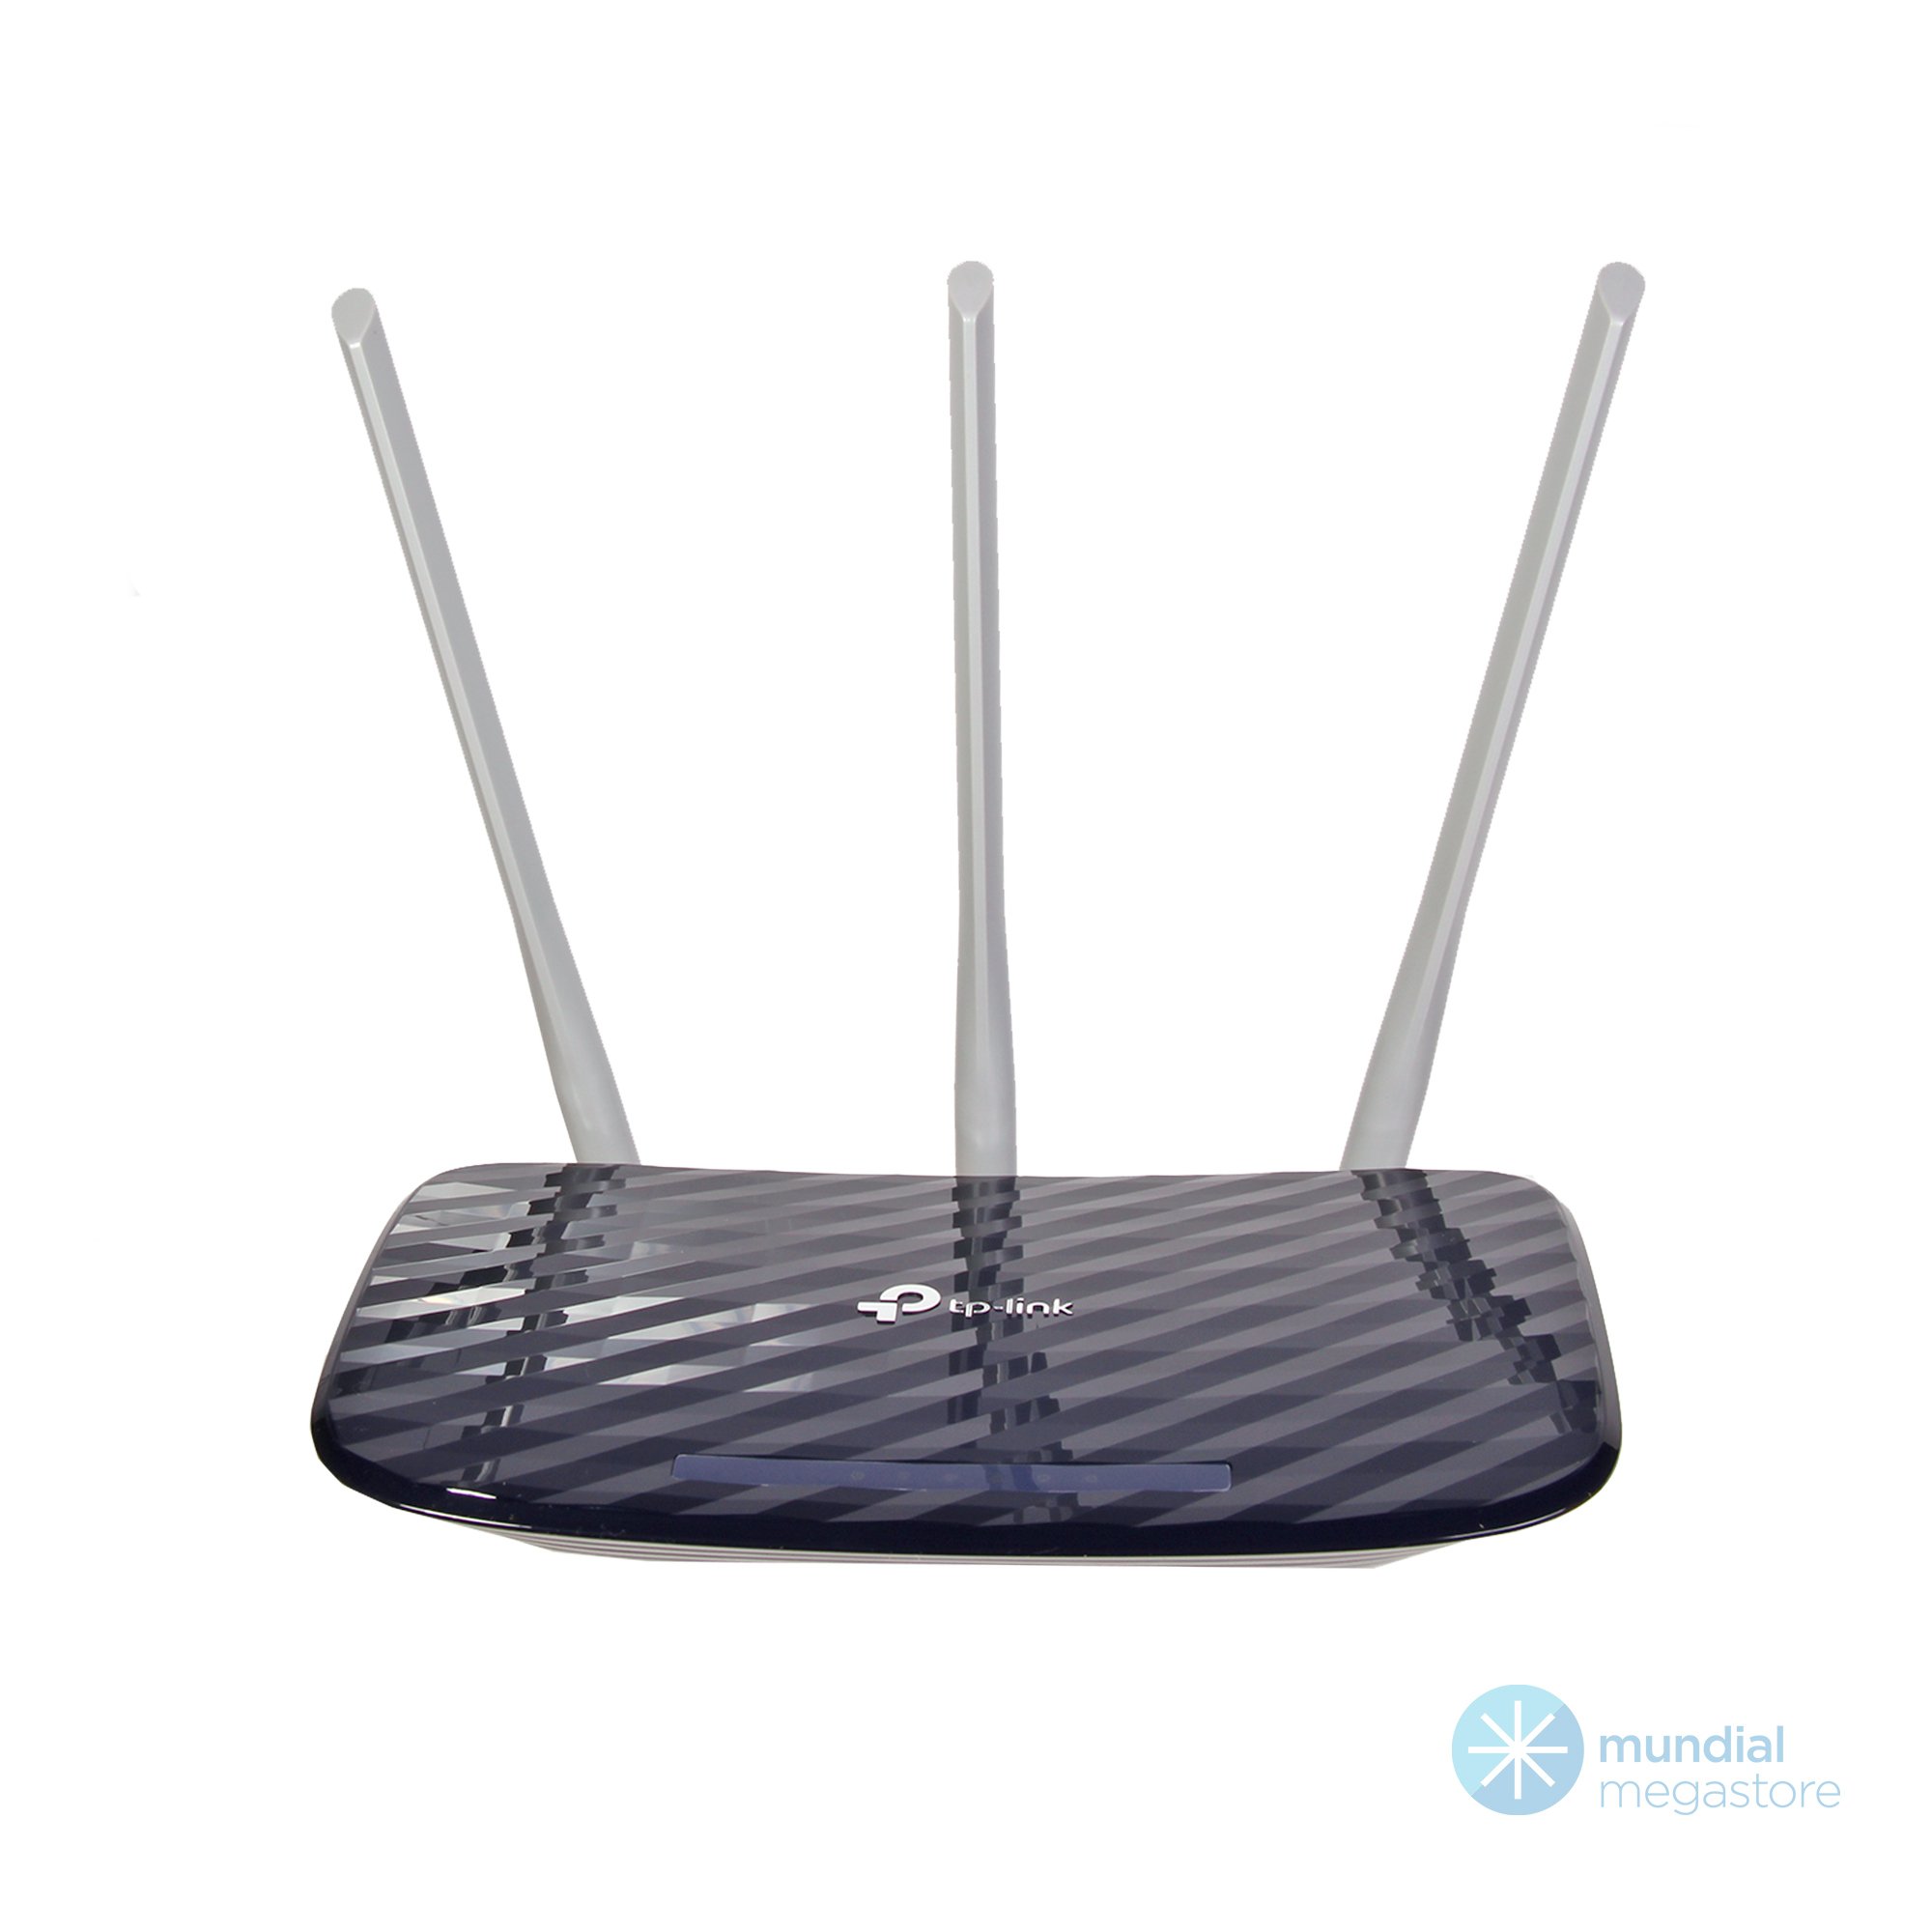 wireless roteador tp link archer c20 ac 750 24 750mbps 29937 2000 196057